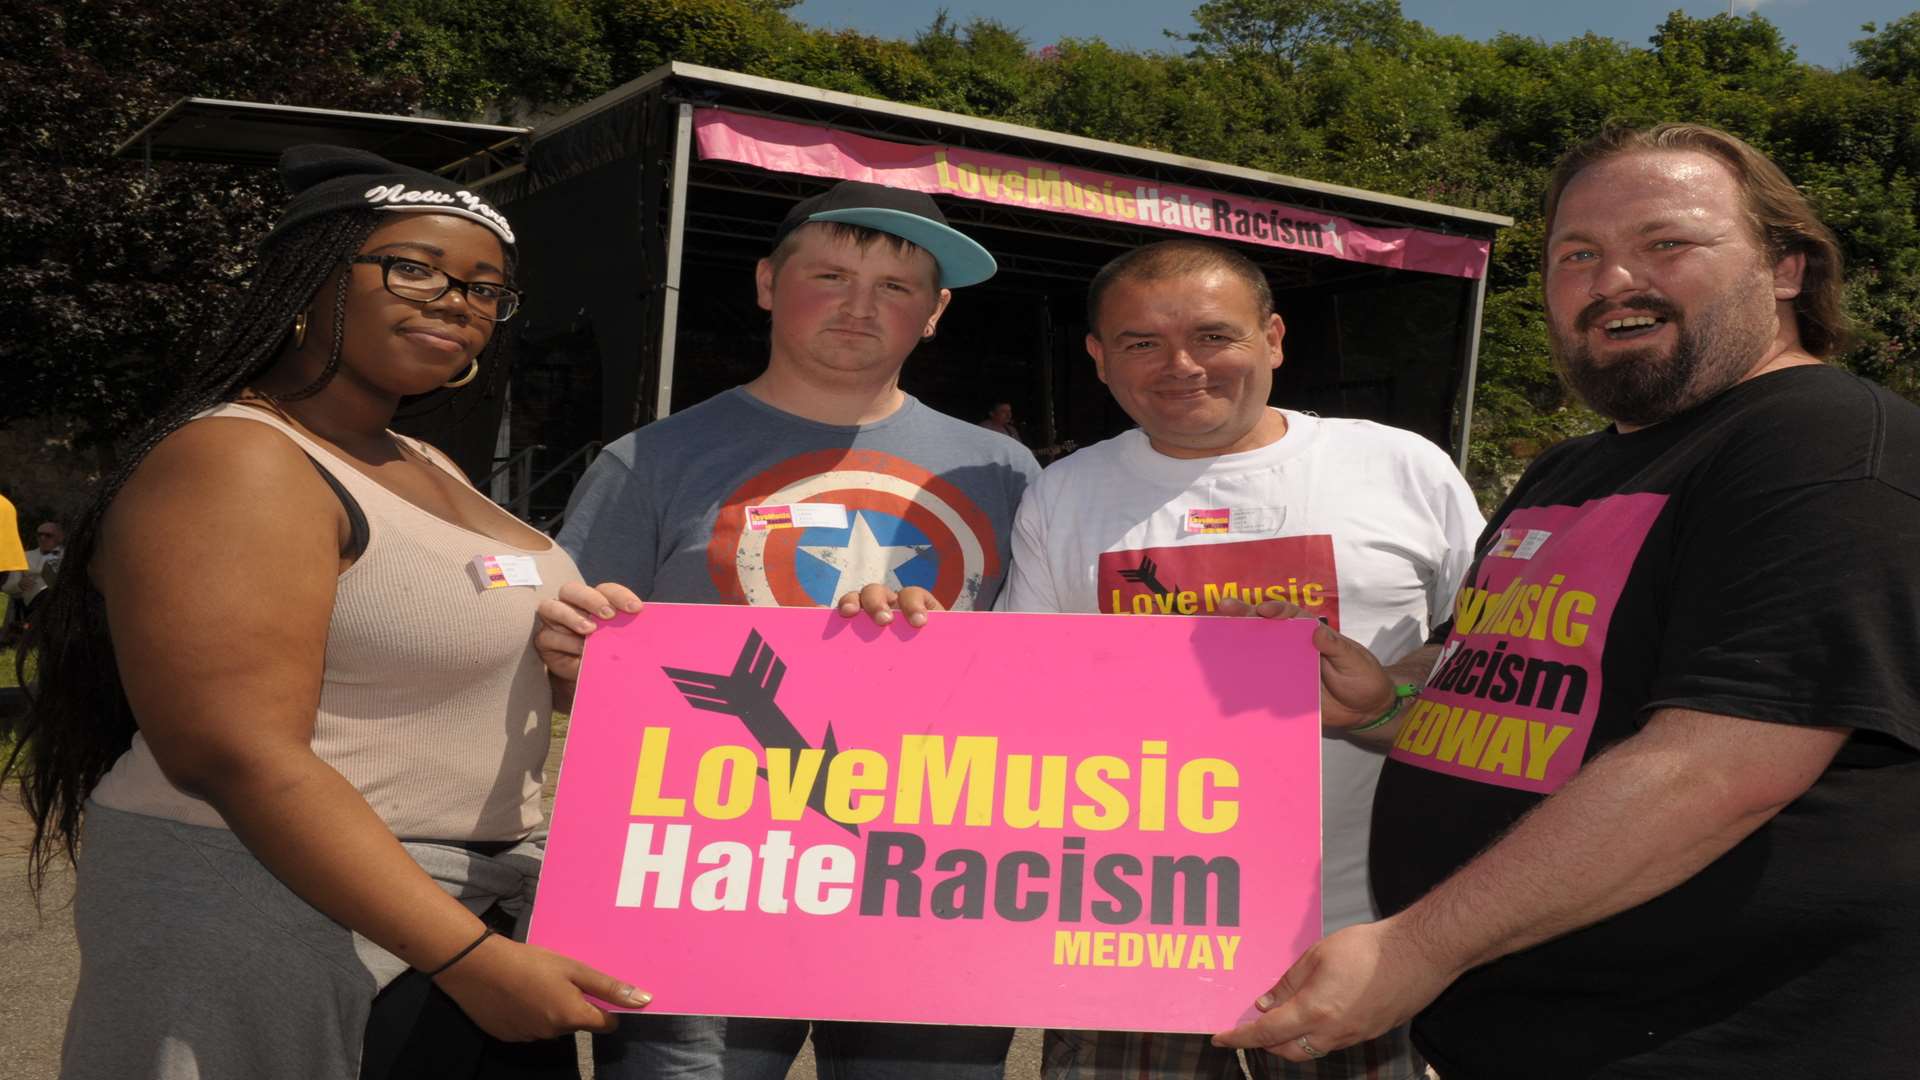 Safiya with the team behind the Love Music Hate Racism festival. Left to right: Stewart, Chris Wyatt, Gary Newell and Vince Maple